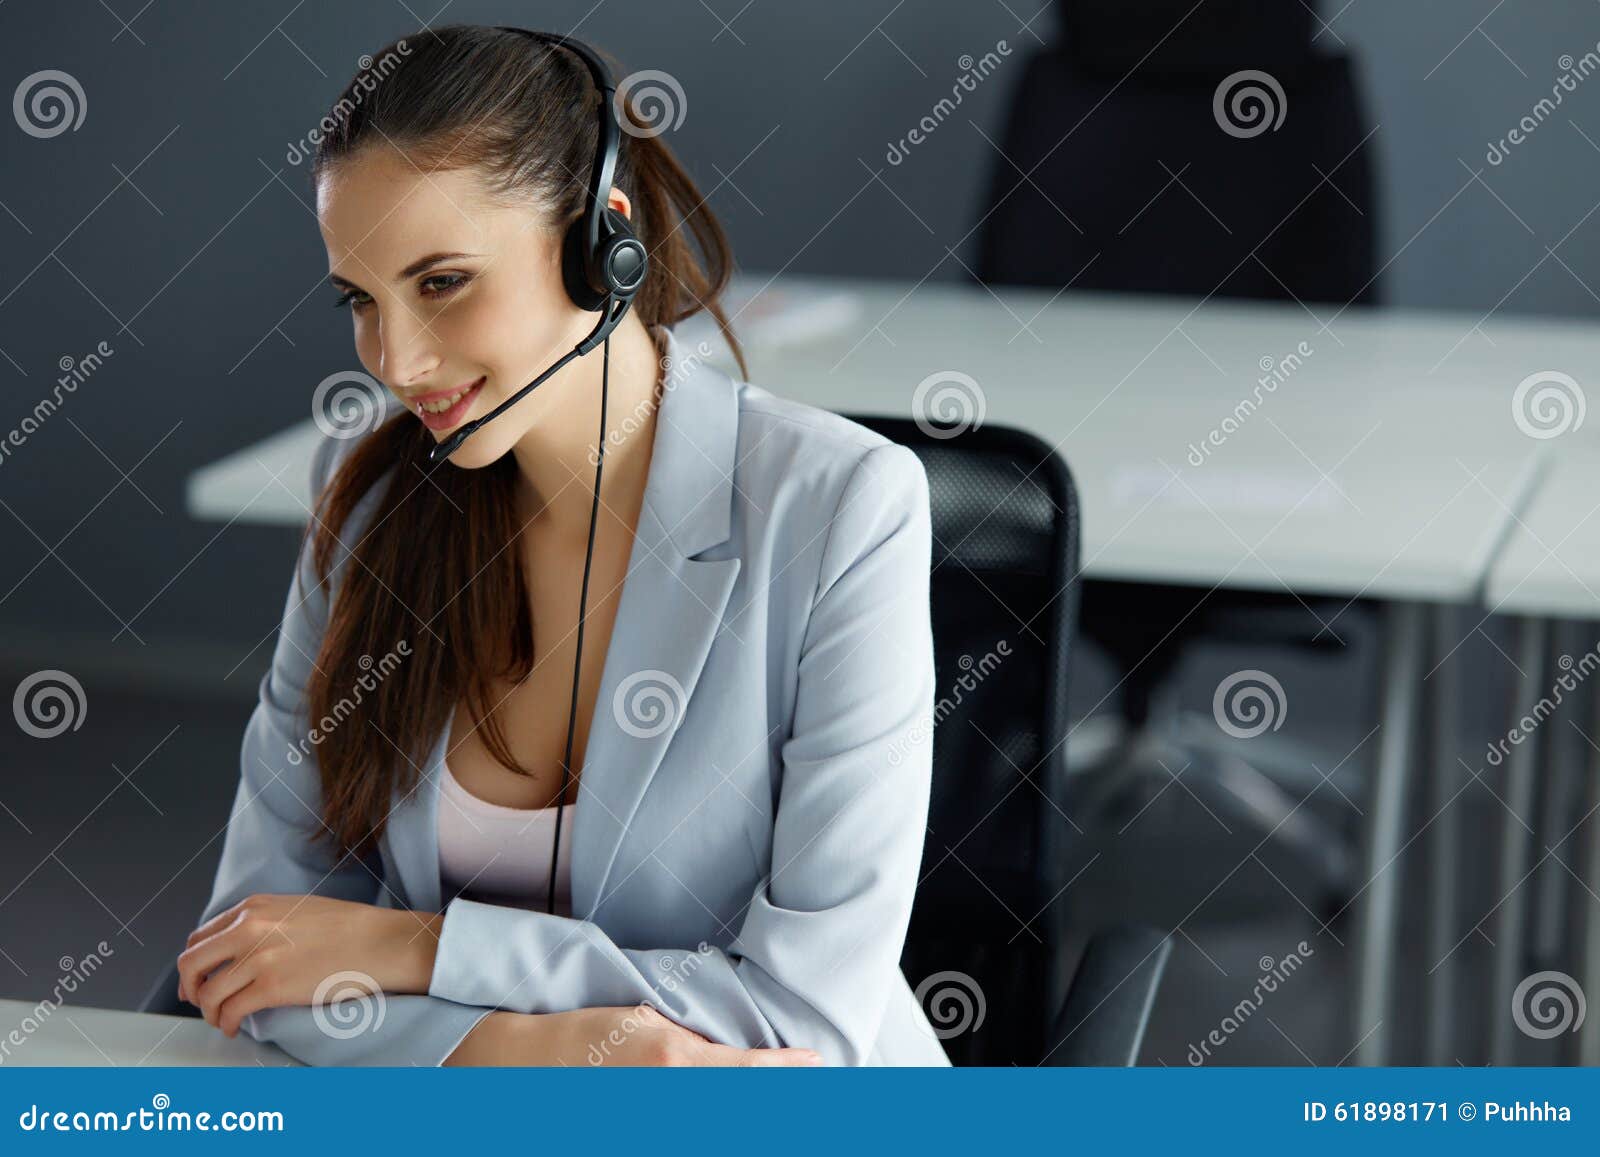 call center operator sitting infront of her computer